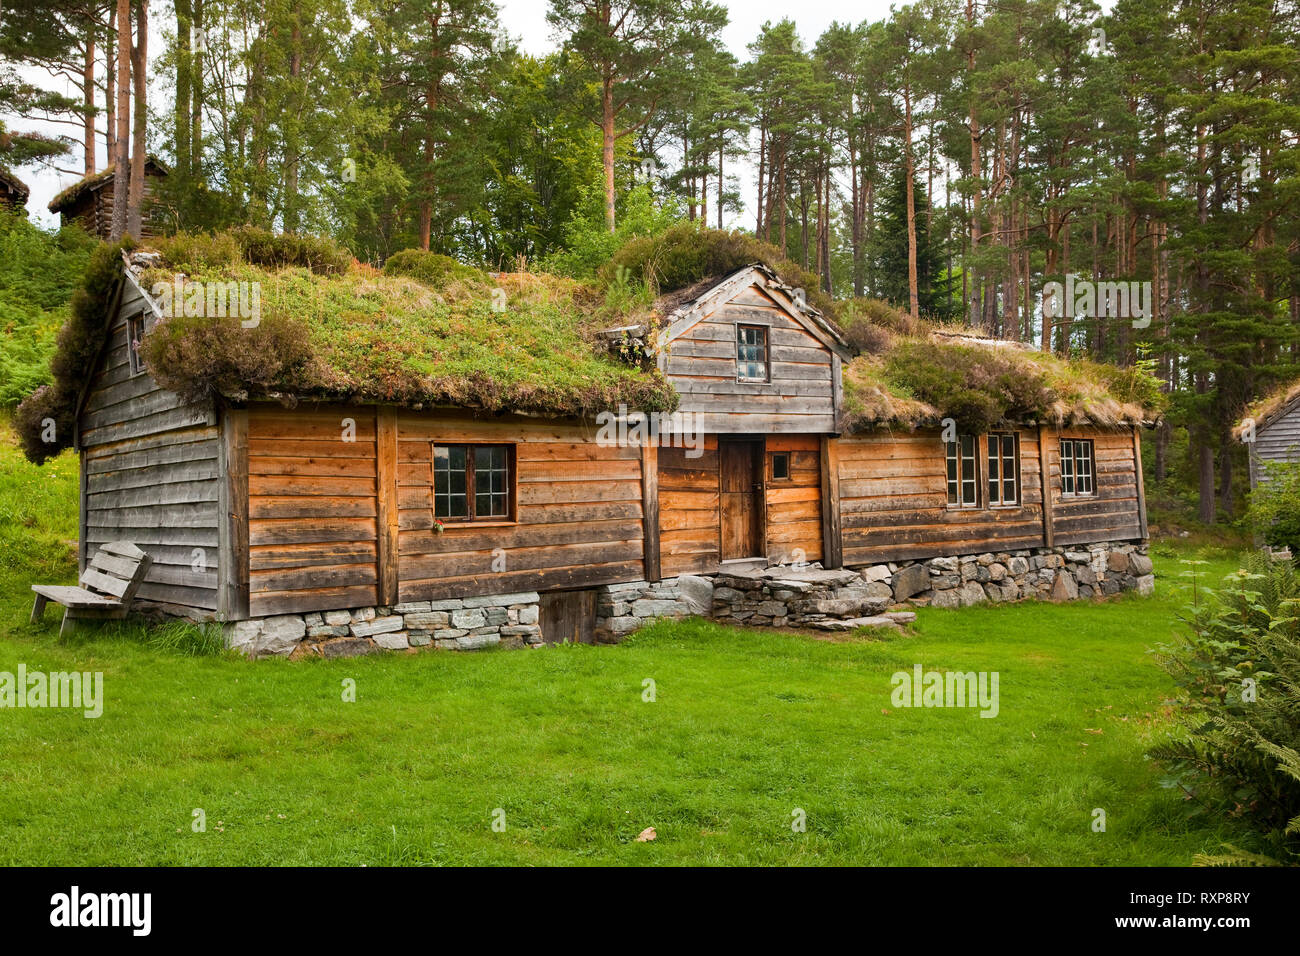 Sod-covered house dating back to the 1830's and identified with a plaque inscribed 'Slettereitstova' at the Sunnmore open-air museum, on the outskirts of Alesund, Norway Stock Photo